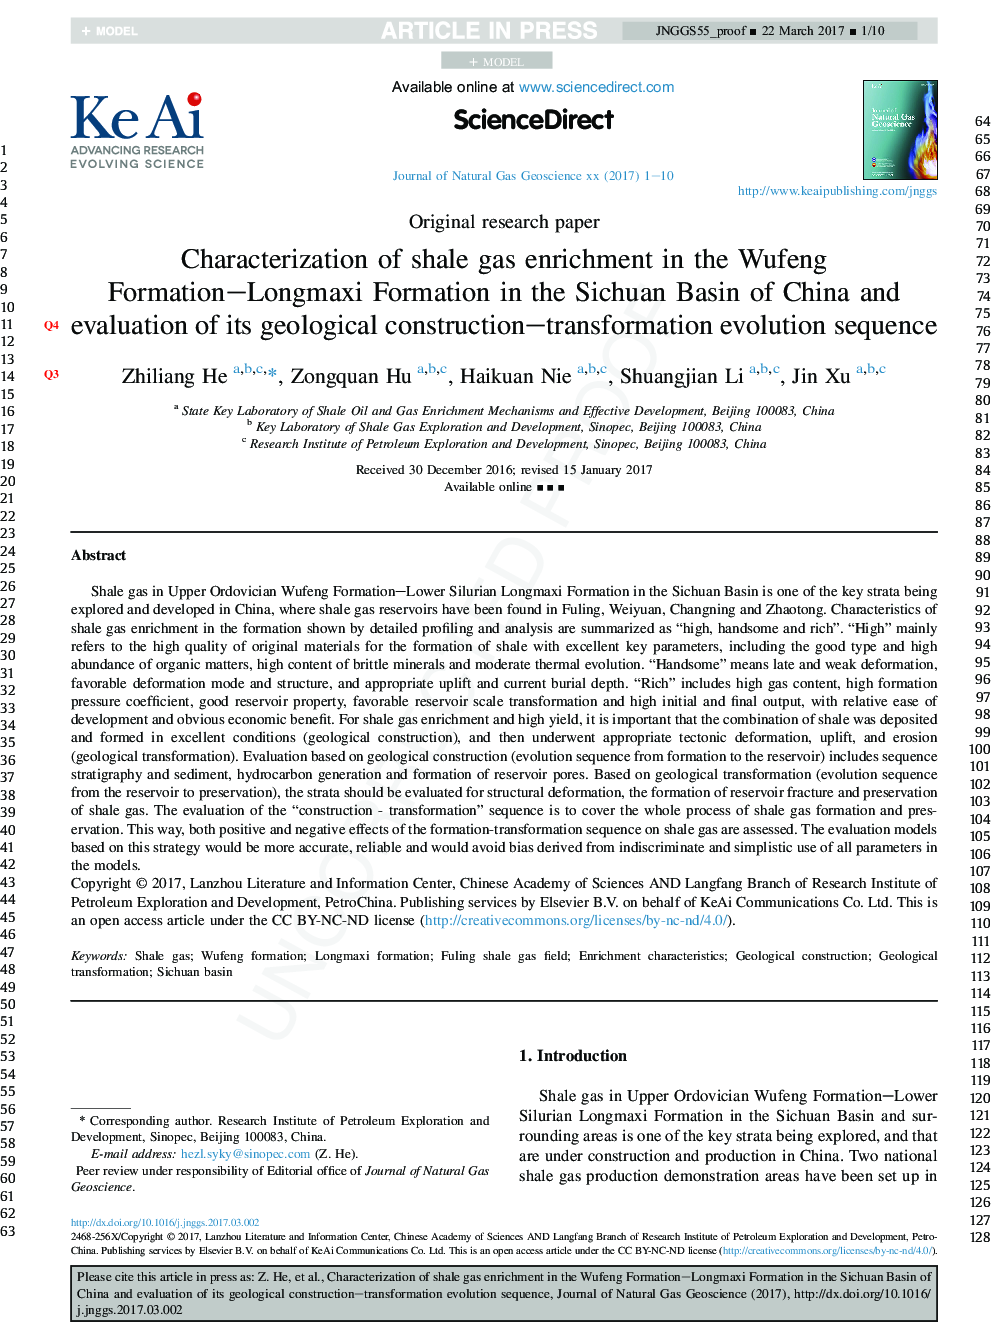 Characterization of shale gas enrichment in the Wufeng Formation-Longmaxi Formation in the Sichuan Basin of China and evaluation of its geological construction-transformation evolution sequence